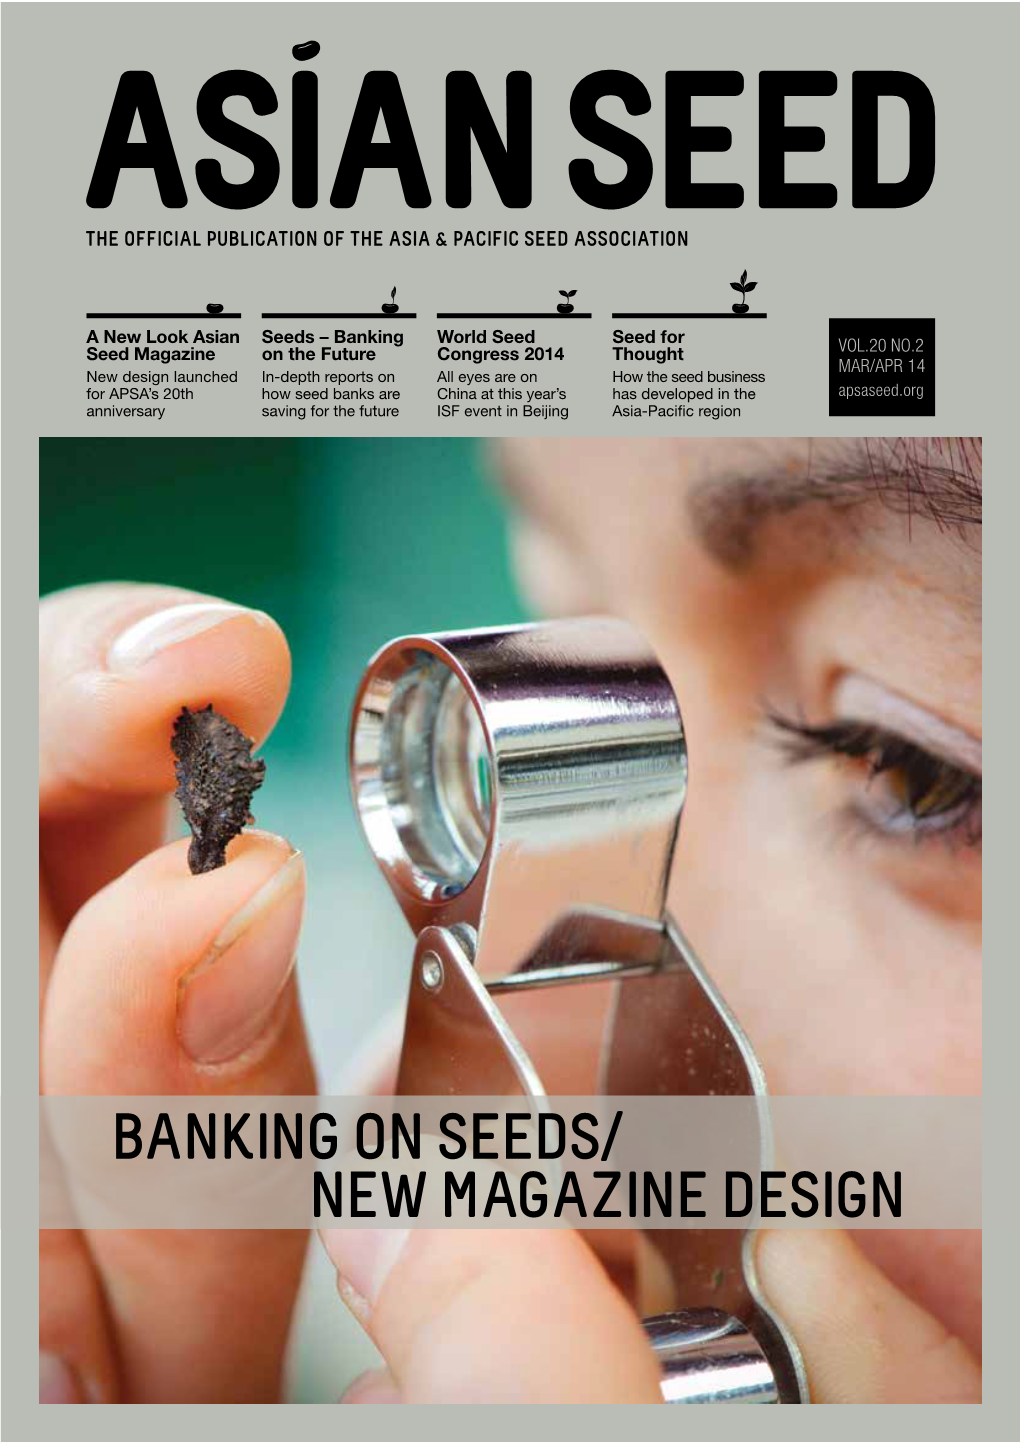 BANKING on SEEDS/ NEW MAGAZINE DESIGN SEED BANKS Keeping the Books Smooth Management of the Genebank Demands Meticulous Recordkeeping